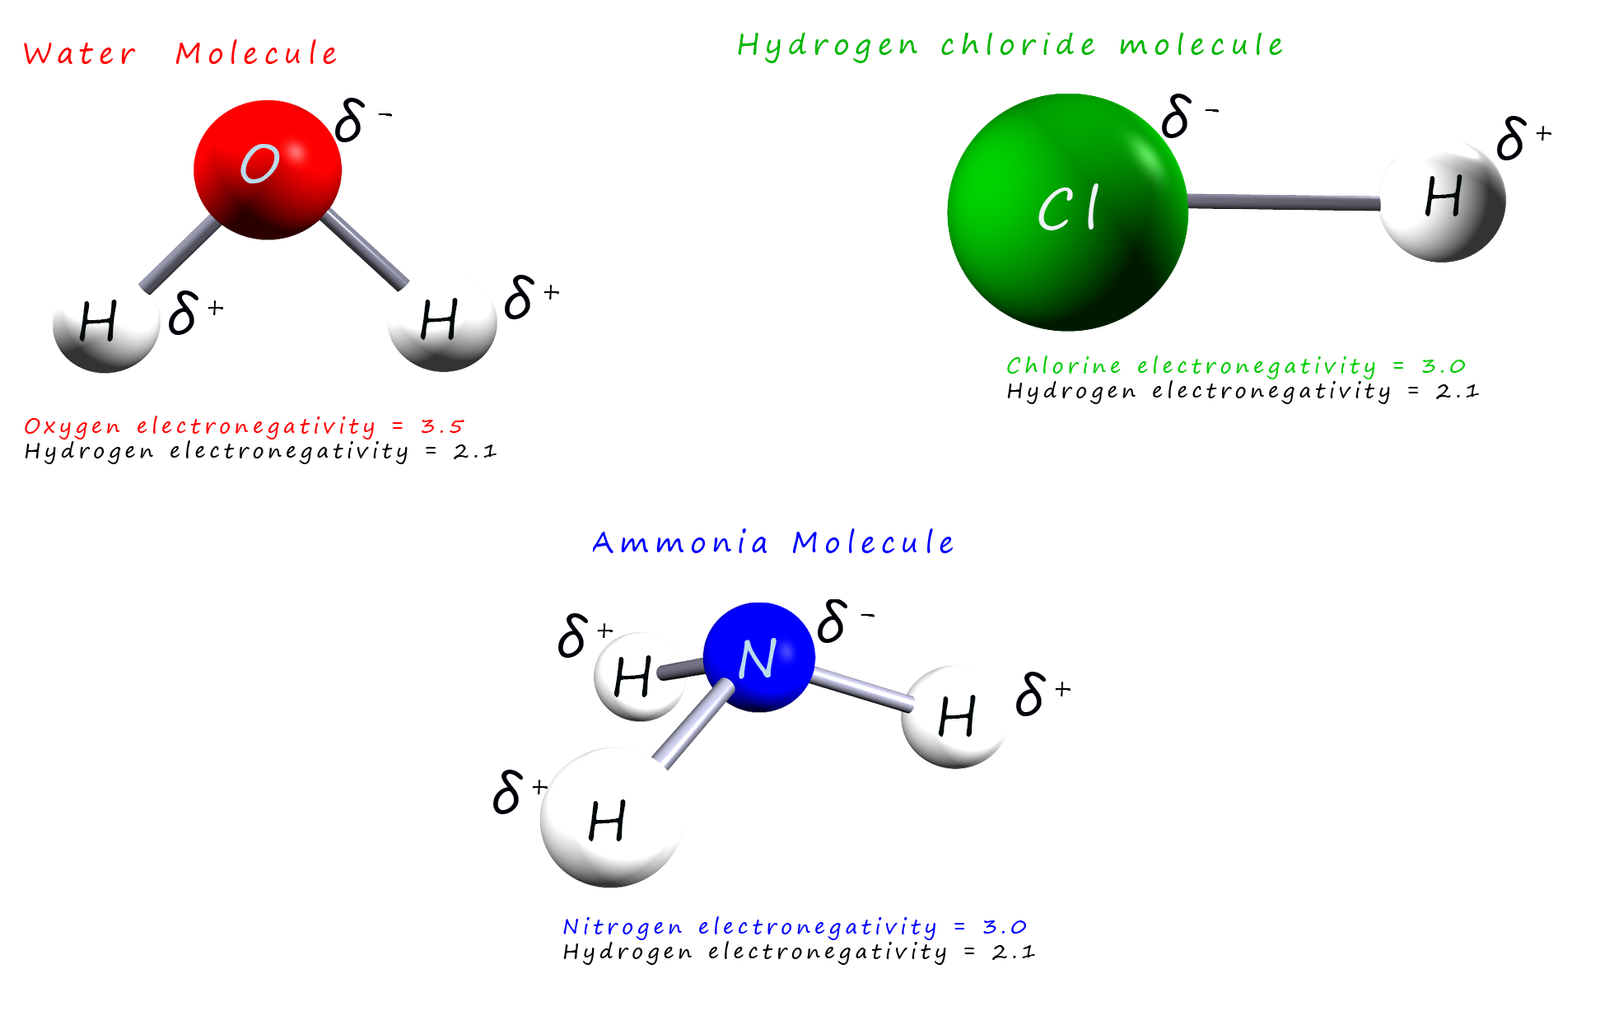 Water, ammonia and hydrogen chloride molecules are all polar molecules with polar covalent bonds